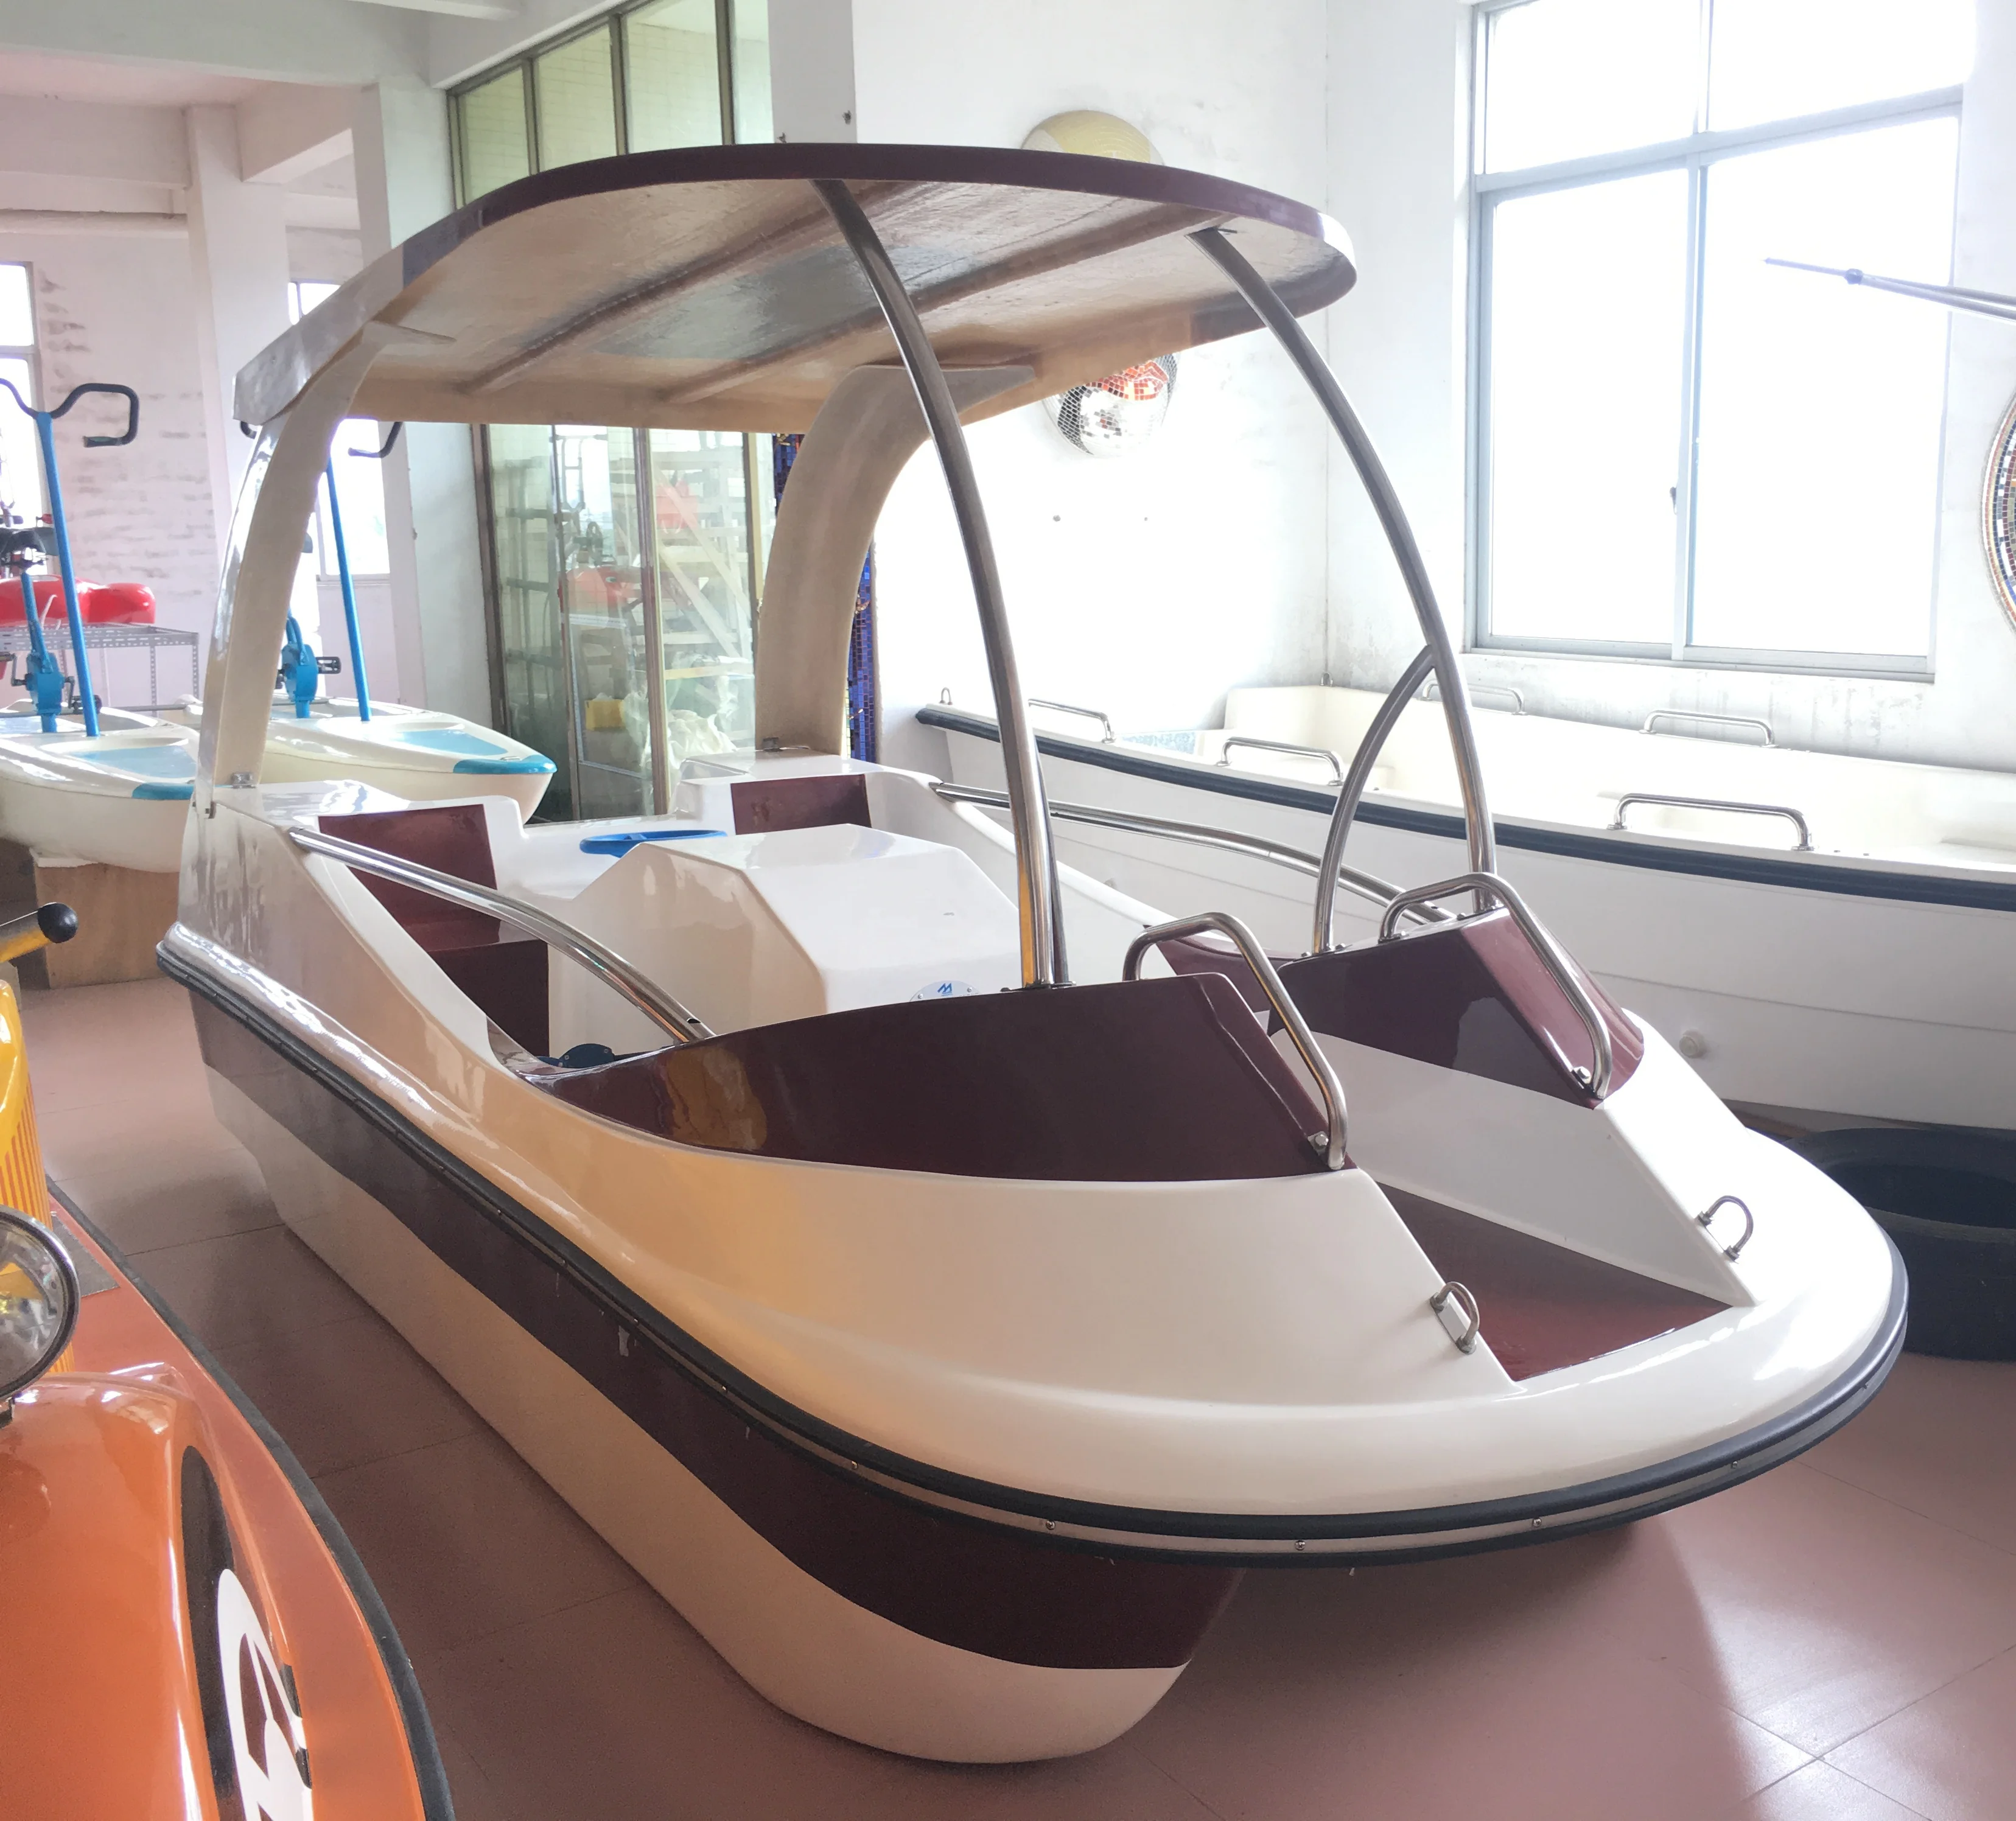 

4seat Fiberglass Electric boat Water play Amusement Equipment (M-076)Pedal Boat for sale, According to you